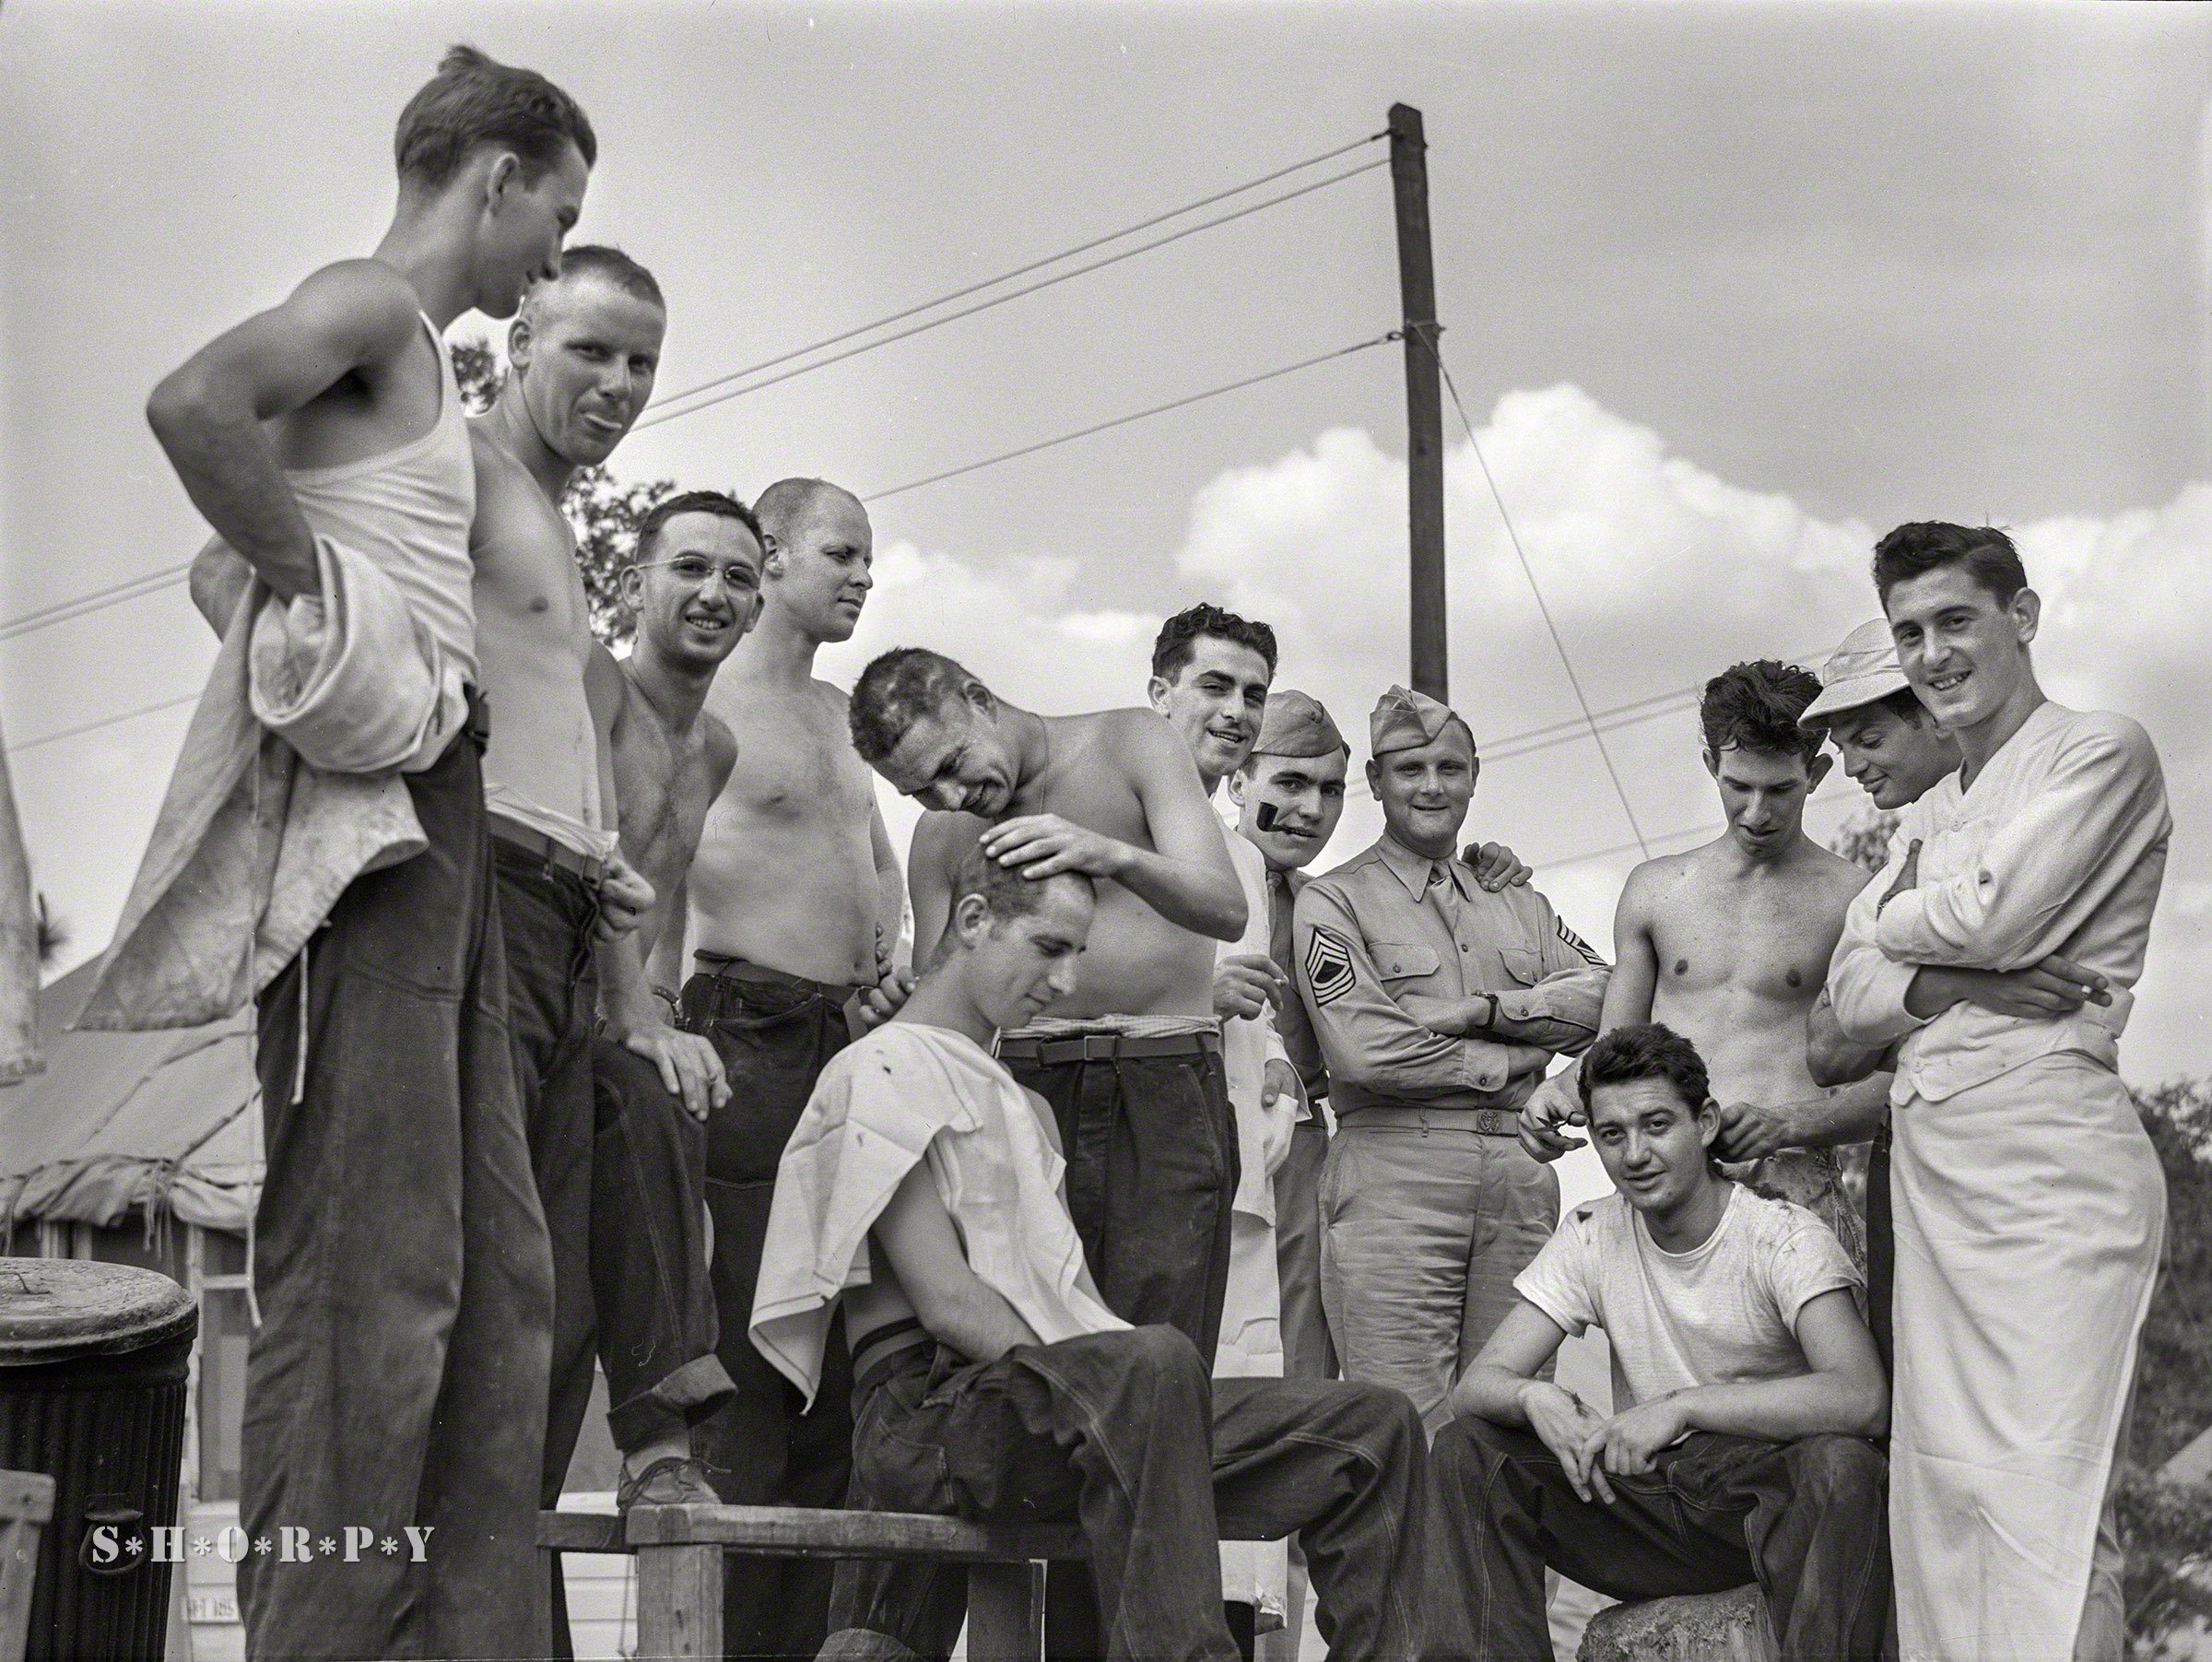 June 1941. "Hattiesburg, Mississippi. Getting a haircut at Camp Shelby." Medium format acetate negative by William Perlitch. View full size.